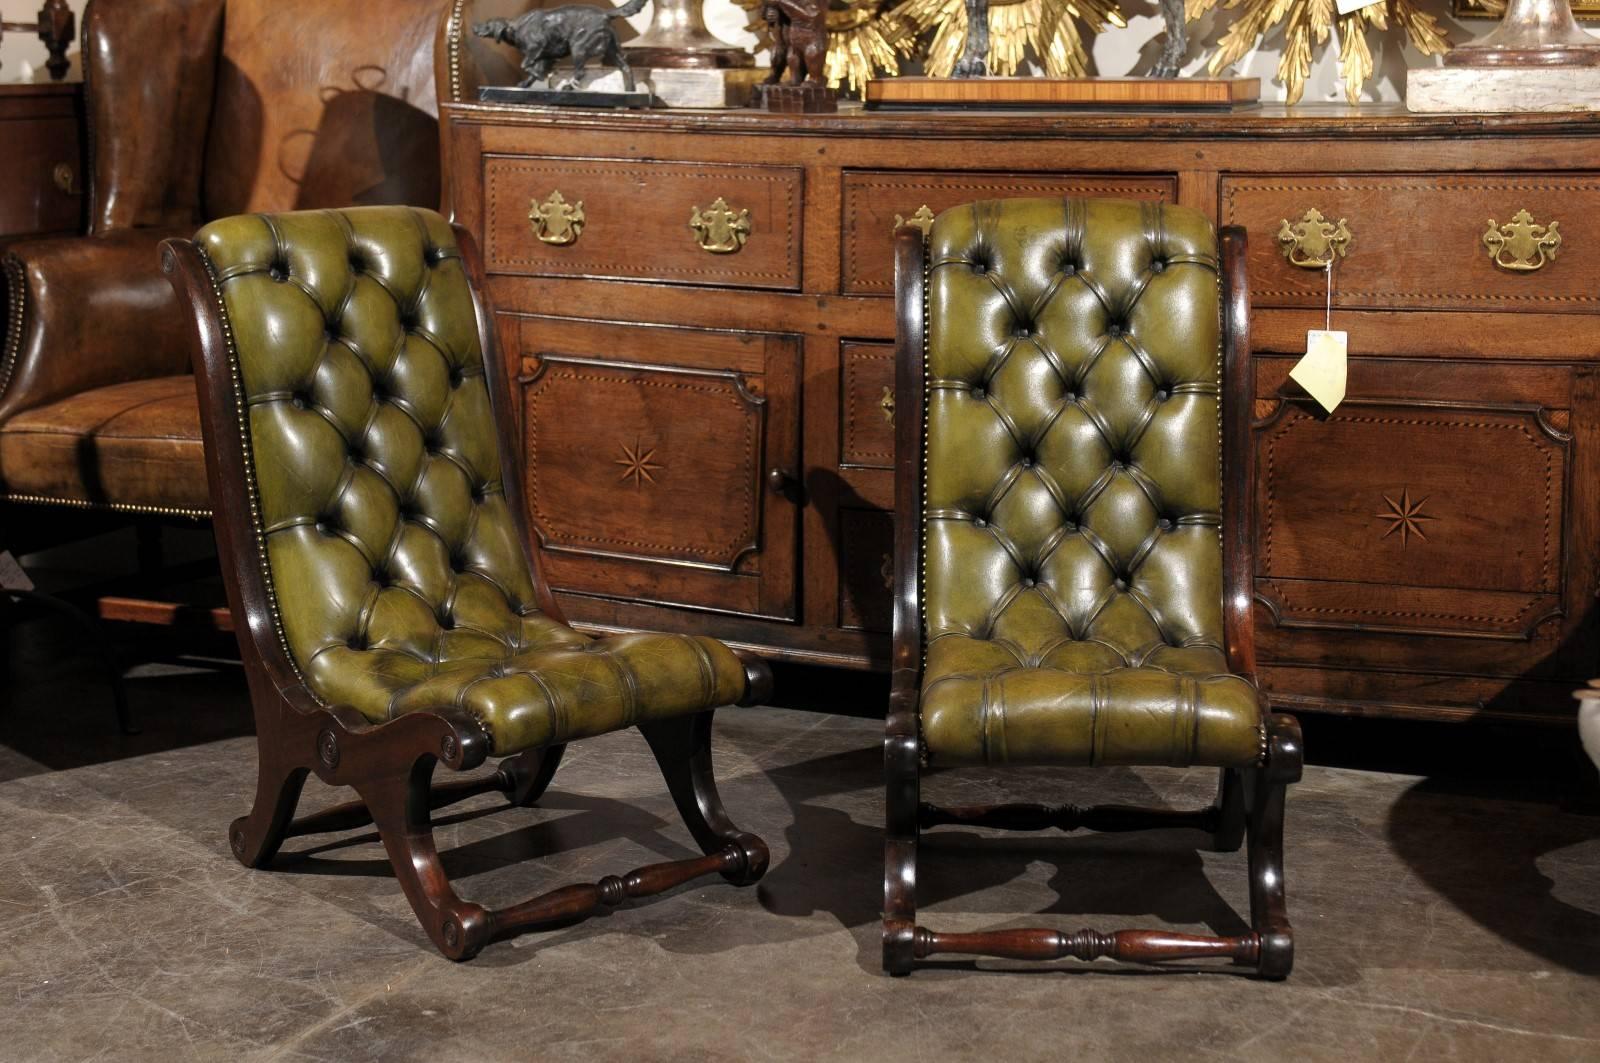 A pair of exquisite turn of the century English green tufted leather slipper chairs. This pair of English slipper chairs from the early 20th century features a green color tufted leather seat with nailhead riveting. The seats are nested into a curvy